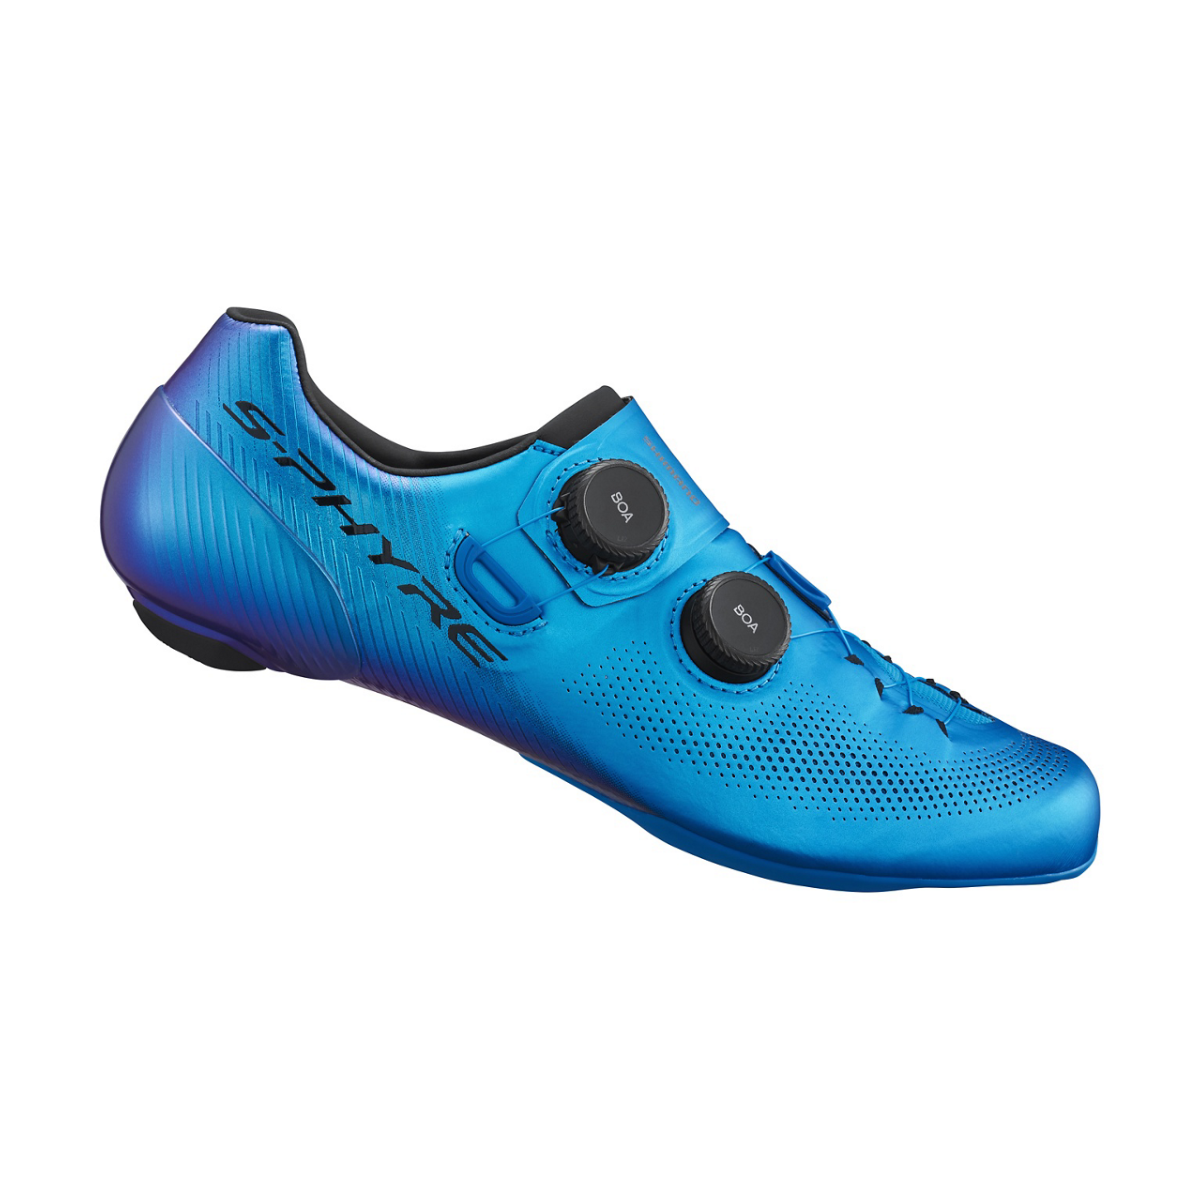 Chaussures Route SHIMANO S-Phyre SH-RC903 Bleu